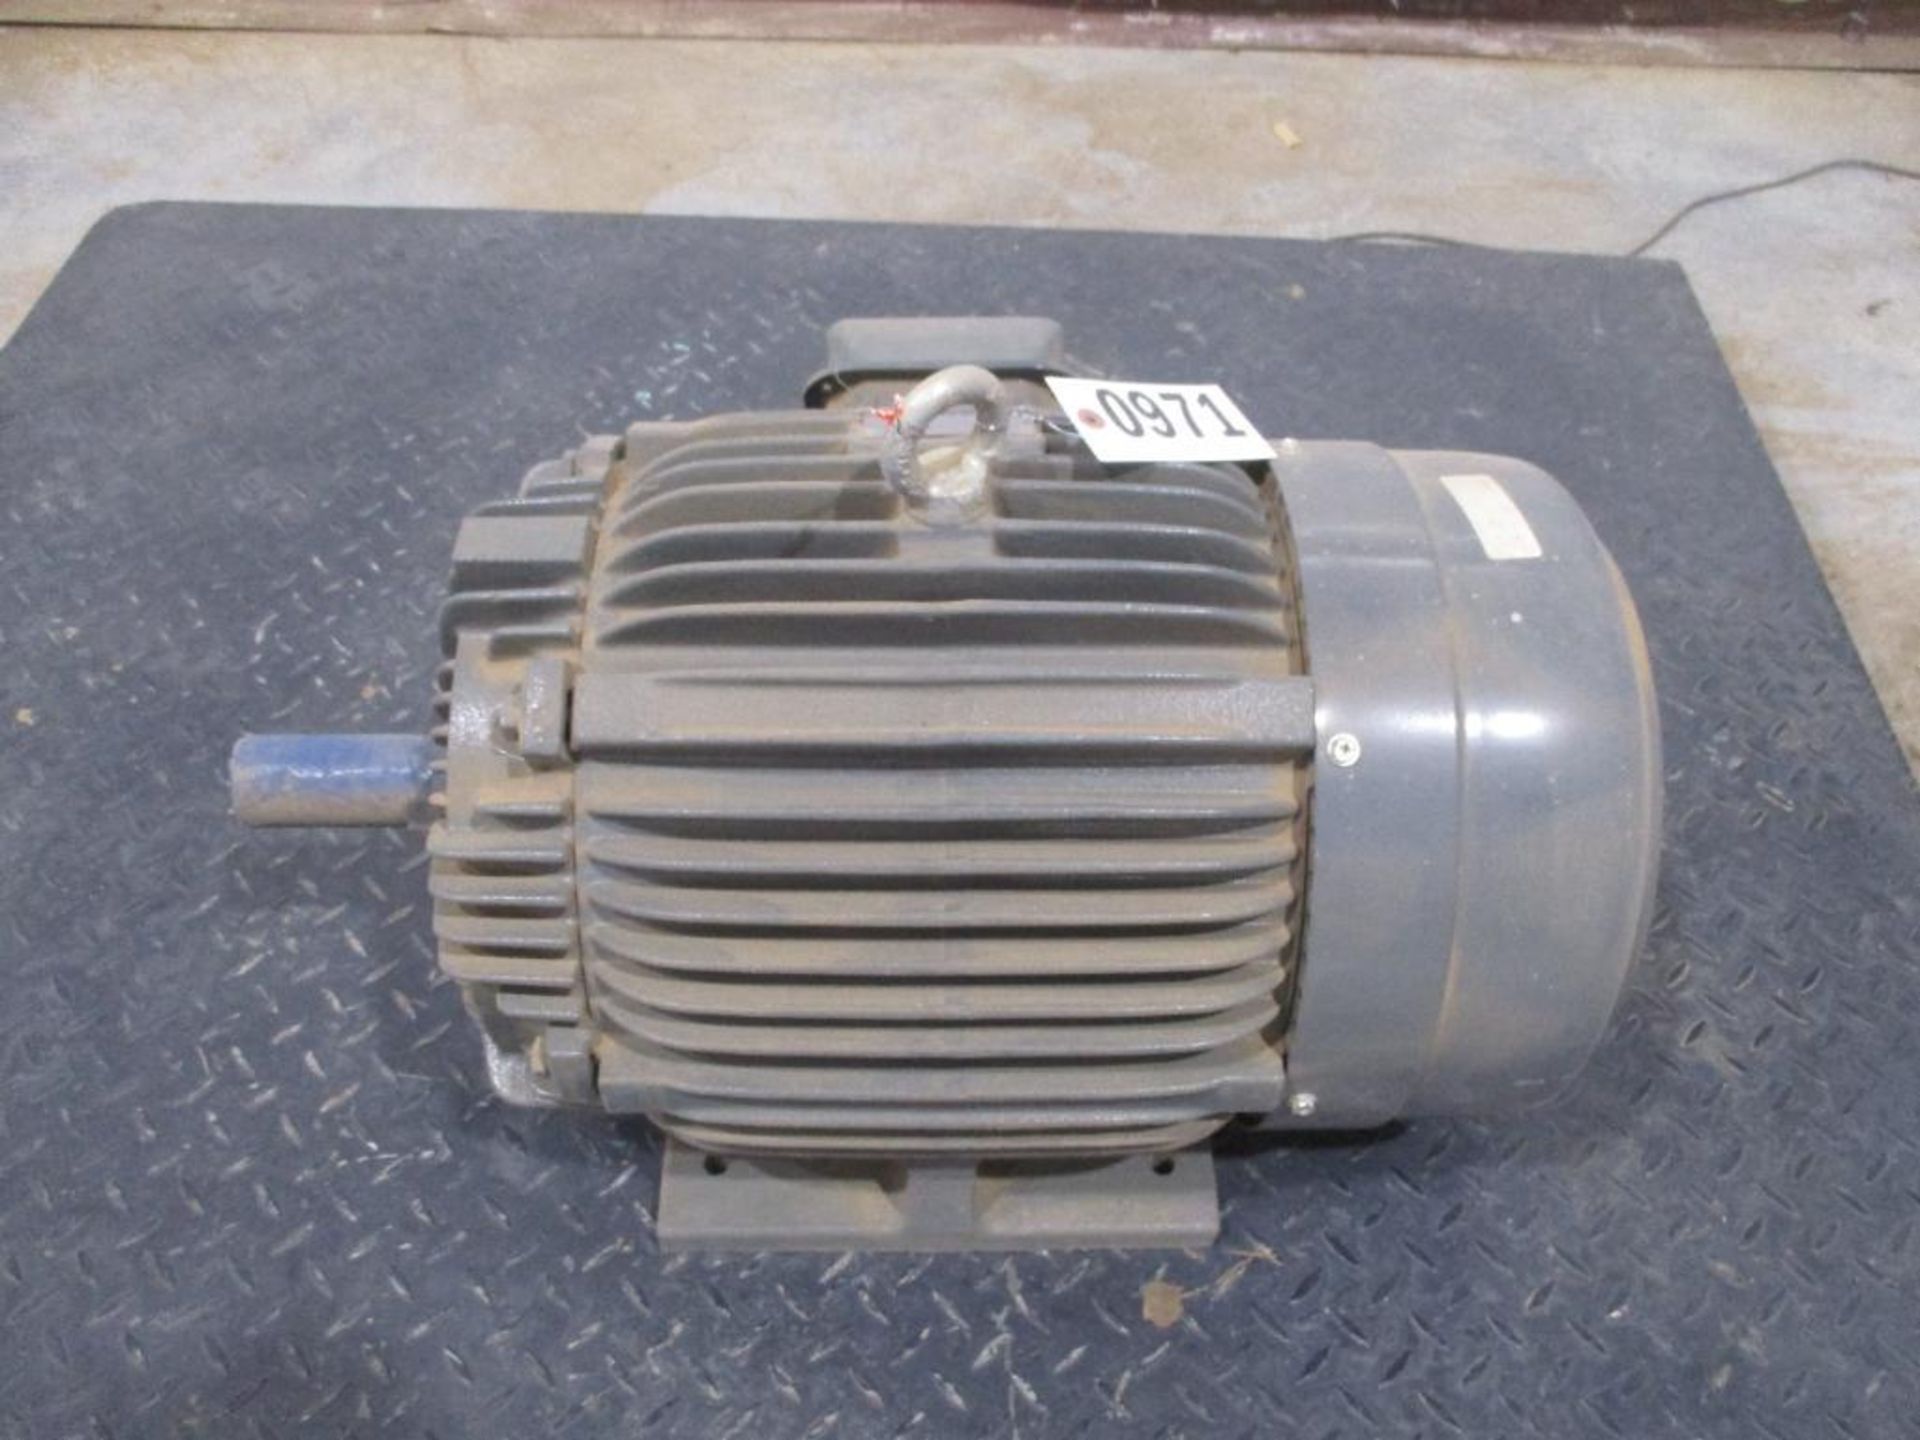 WESTNGHOUSE 3 PHASE 15HP 970-1175RPM 284T FRAME A/C MOTOR P/N NP0156, 419# lbs (There will be a $40 - Image 3 of 6